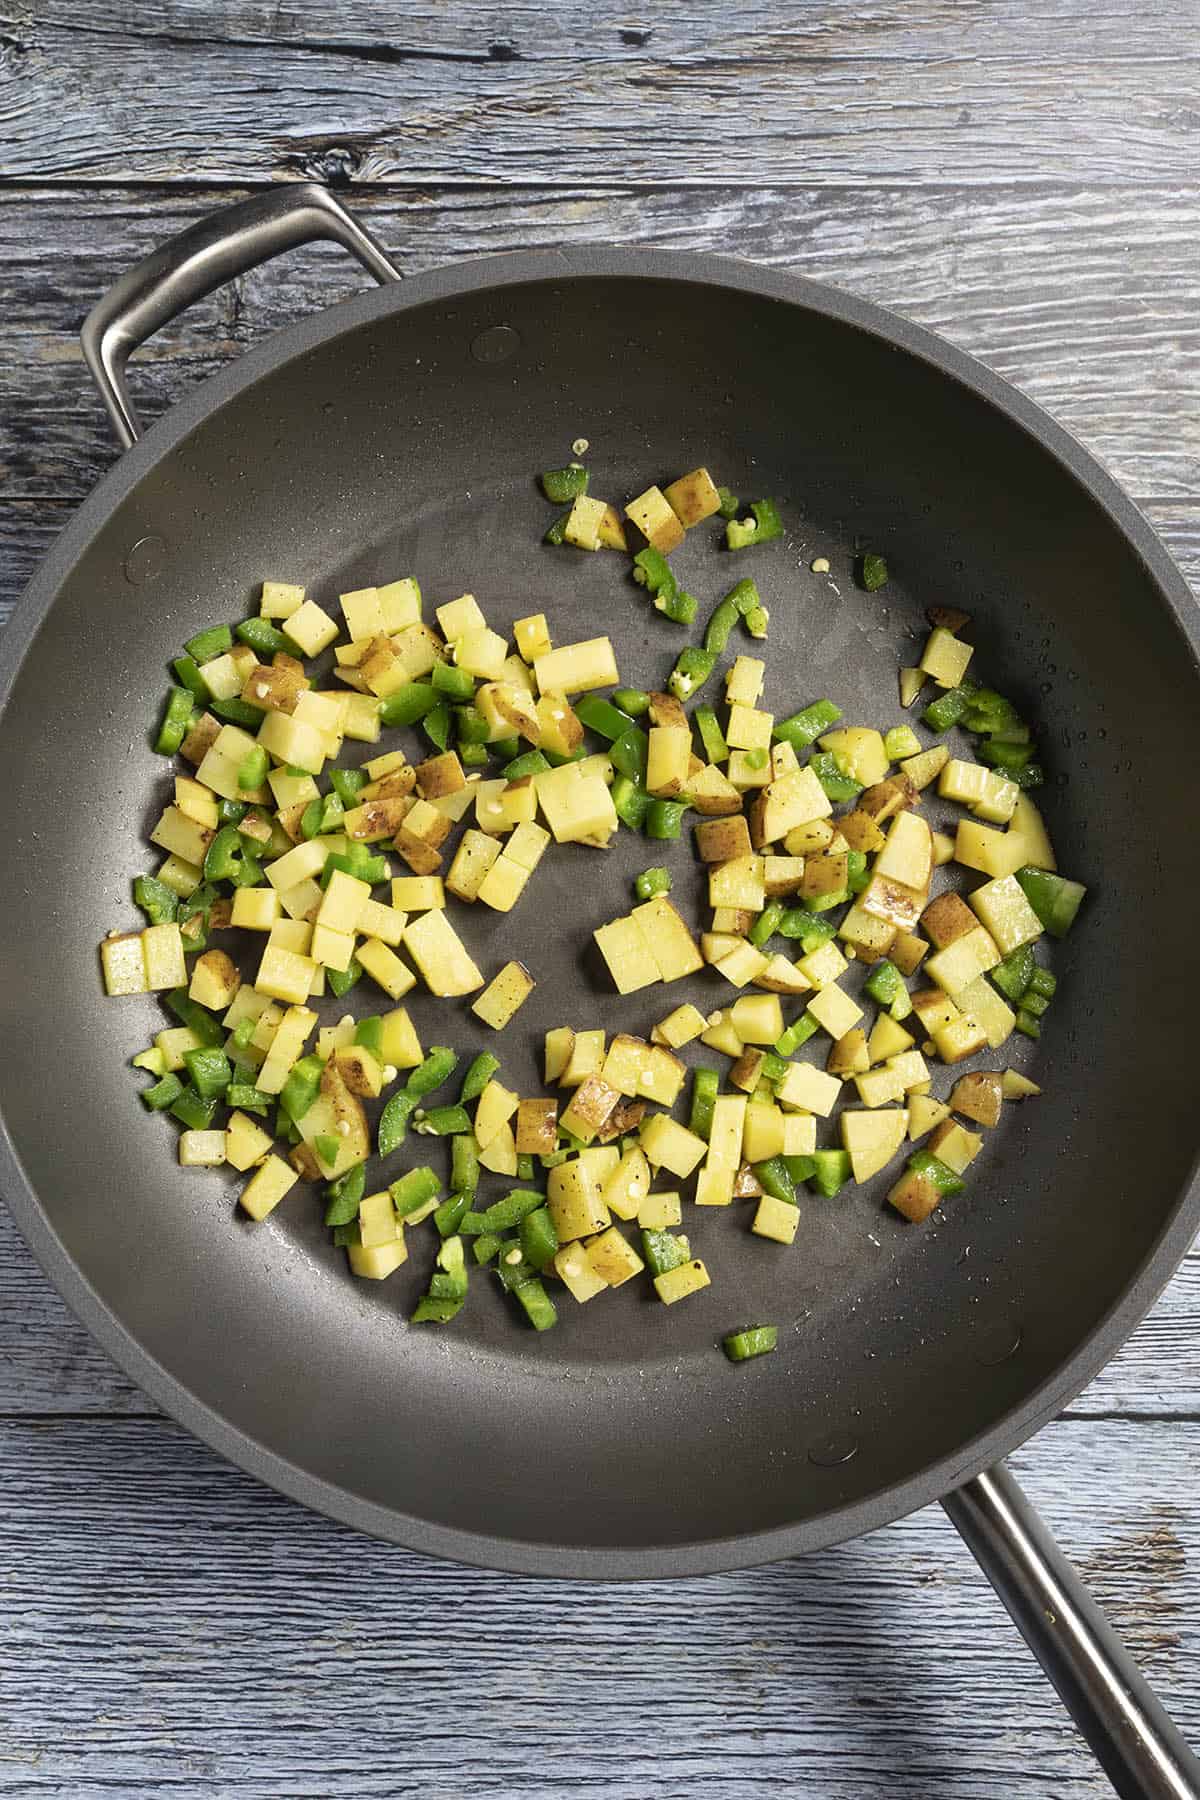 Cooking potatoes with jalapenos for spicy breakfast tacos